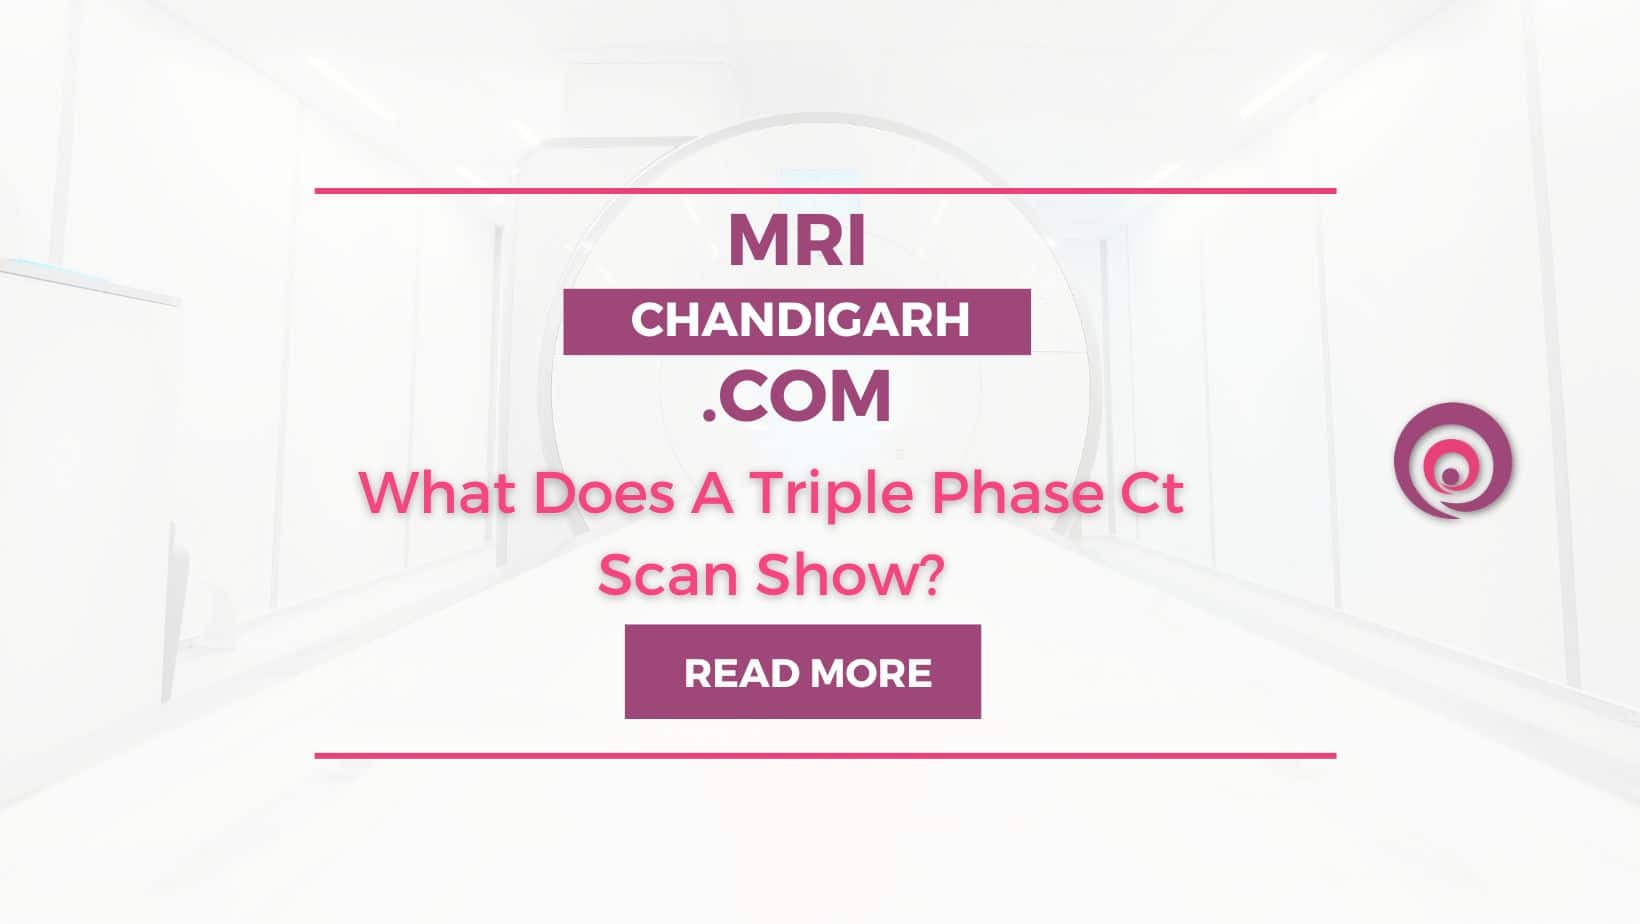 What Does A Triple Phase Ct Scan Show?